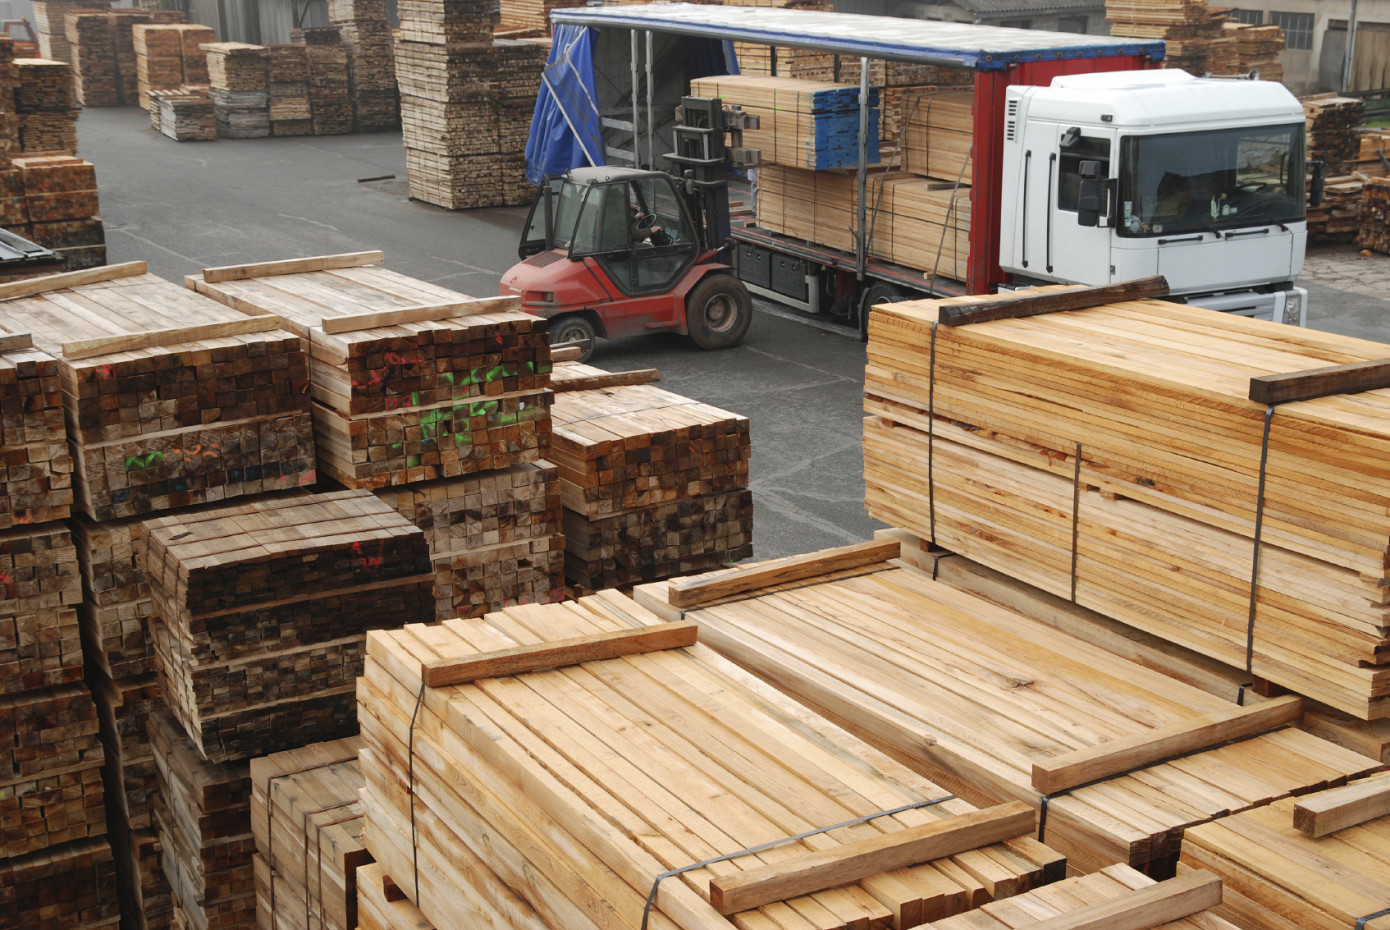 Russia"s lumber production decreased by 17% and plywood by 40% in September